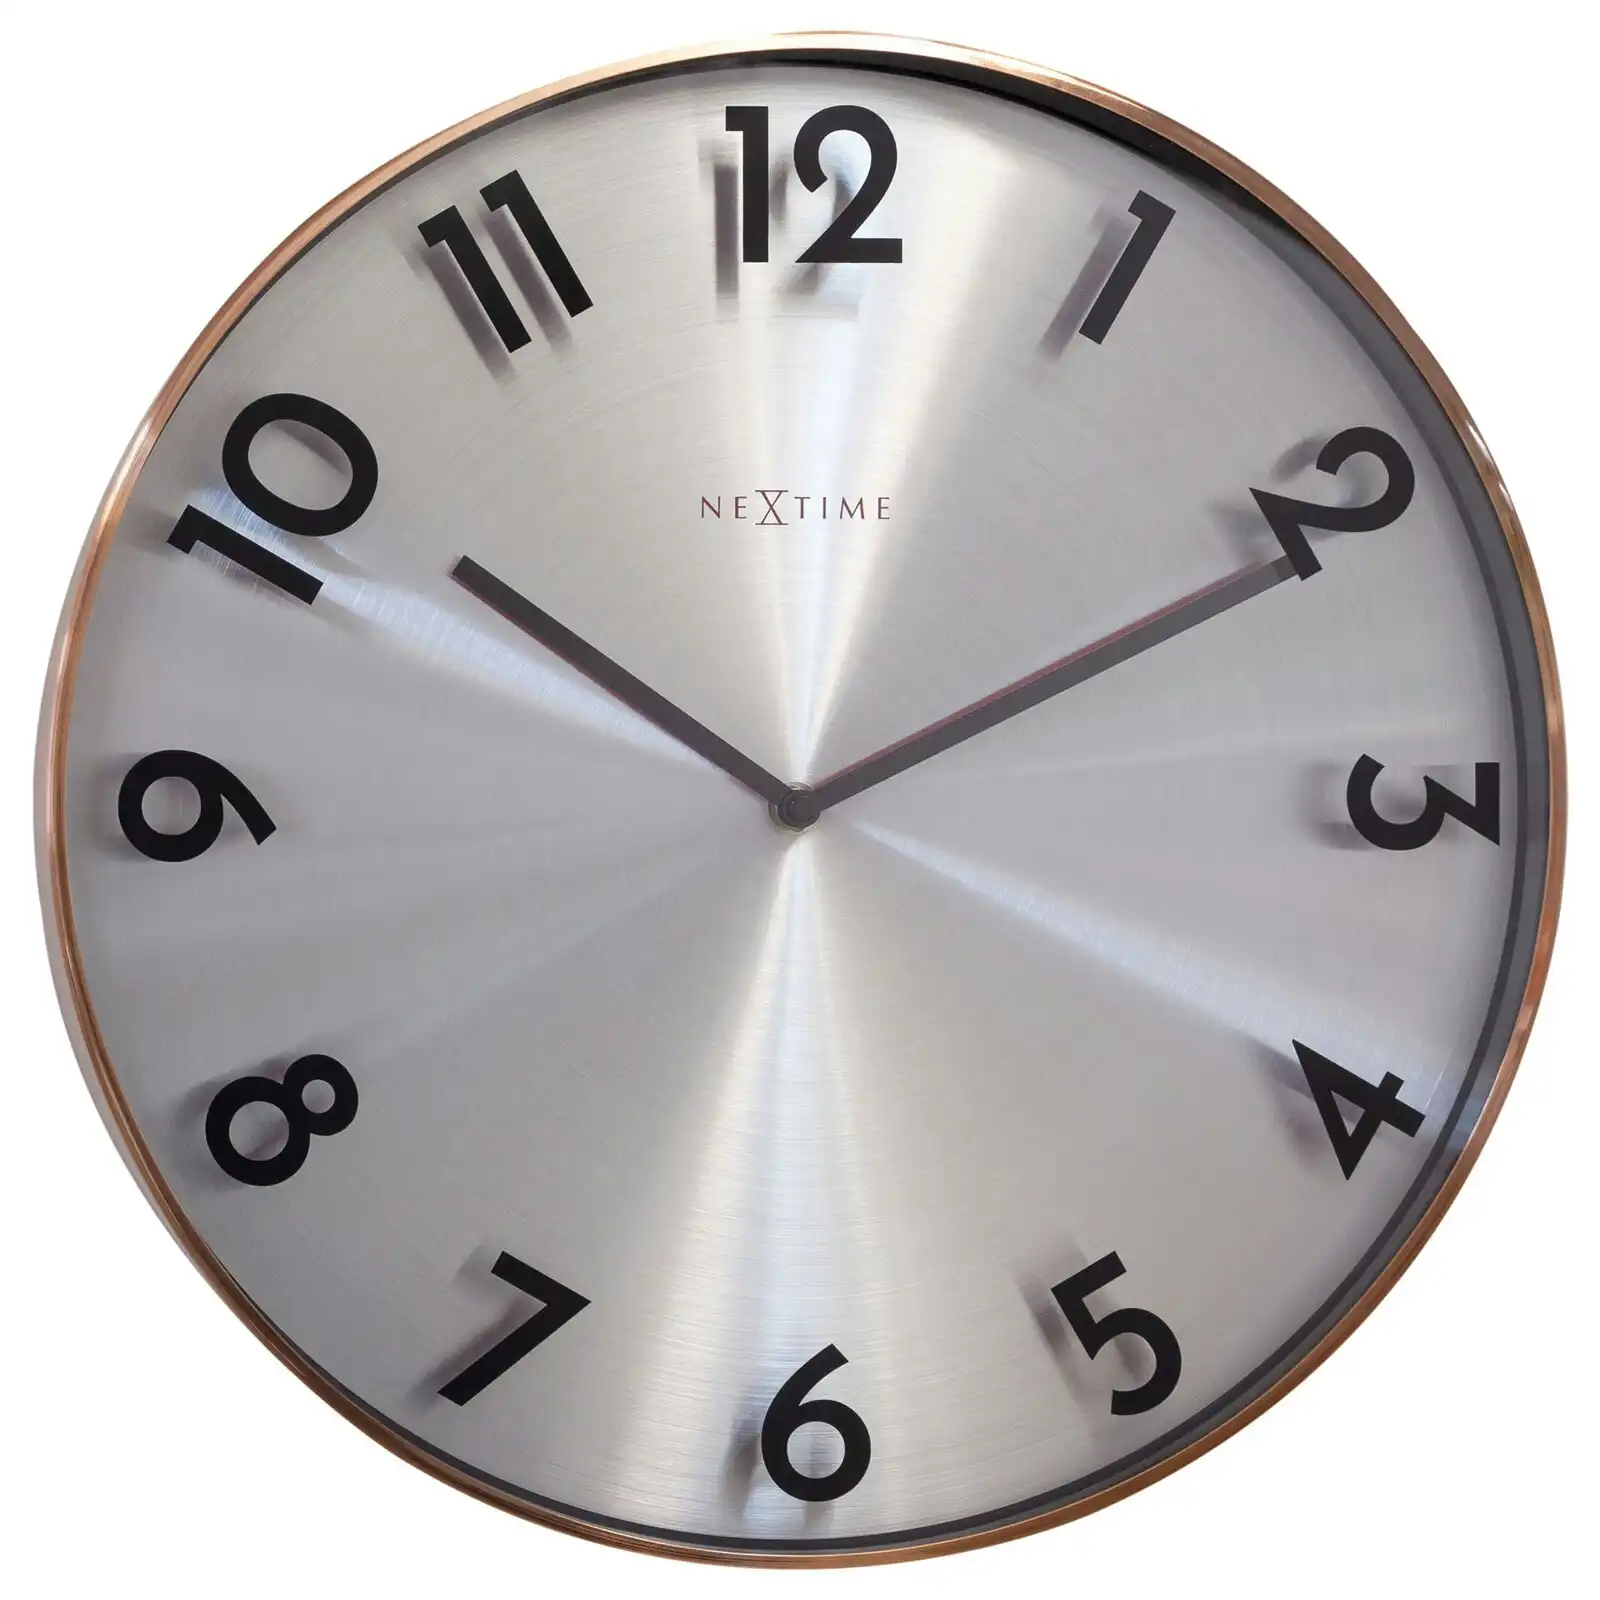 NeXtime Reflection 40cm Silent Wall Clock Hanging Round Home/Office Decor Copper